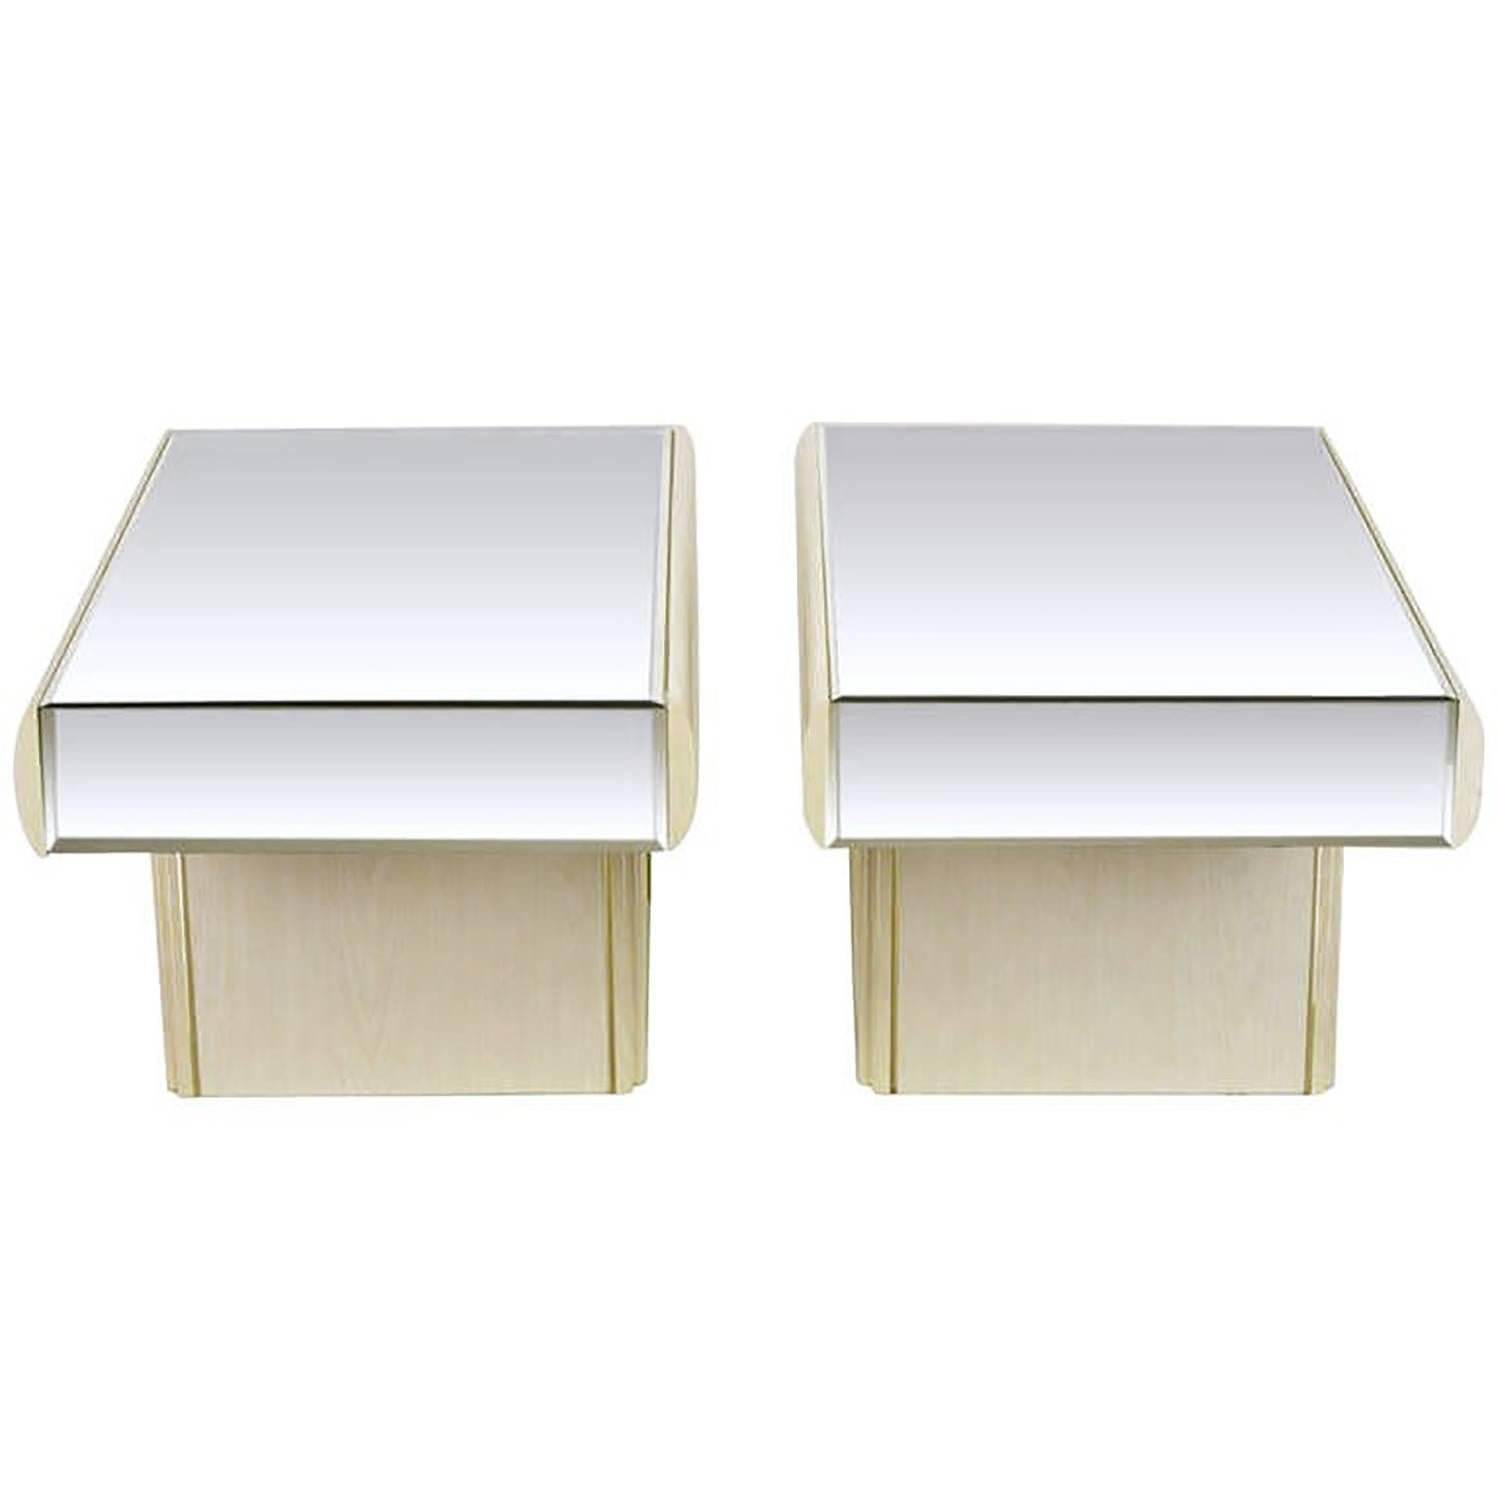 Pair of Italian White Glazed Oak and Mirror Cantilever End Tables